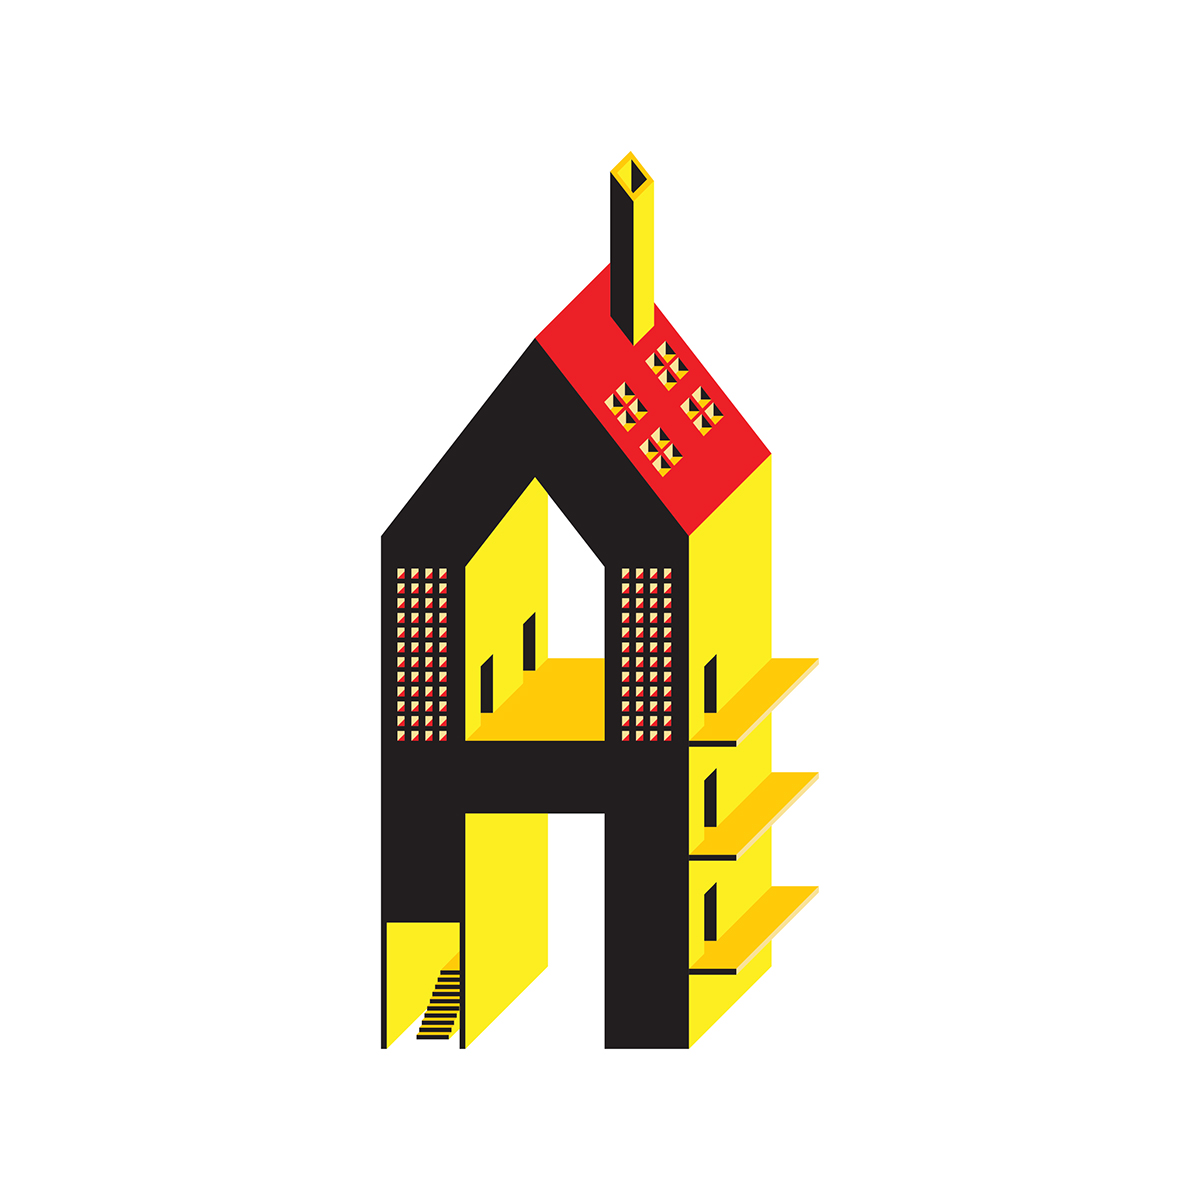 houses letters DearArchitecture Competition New York agency red blue green yellow 100houses gif black stairs windows